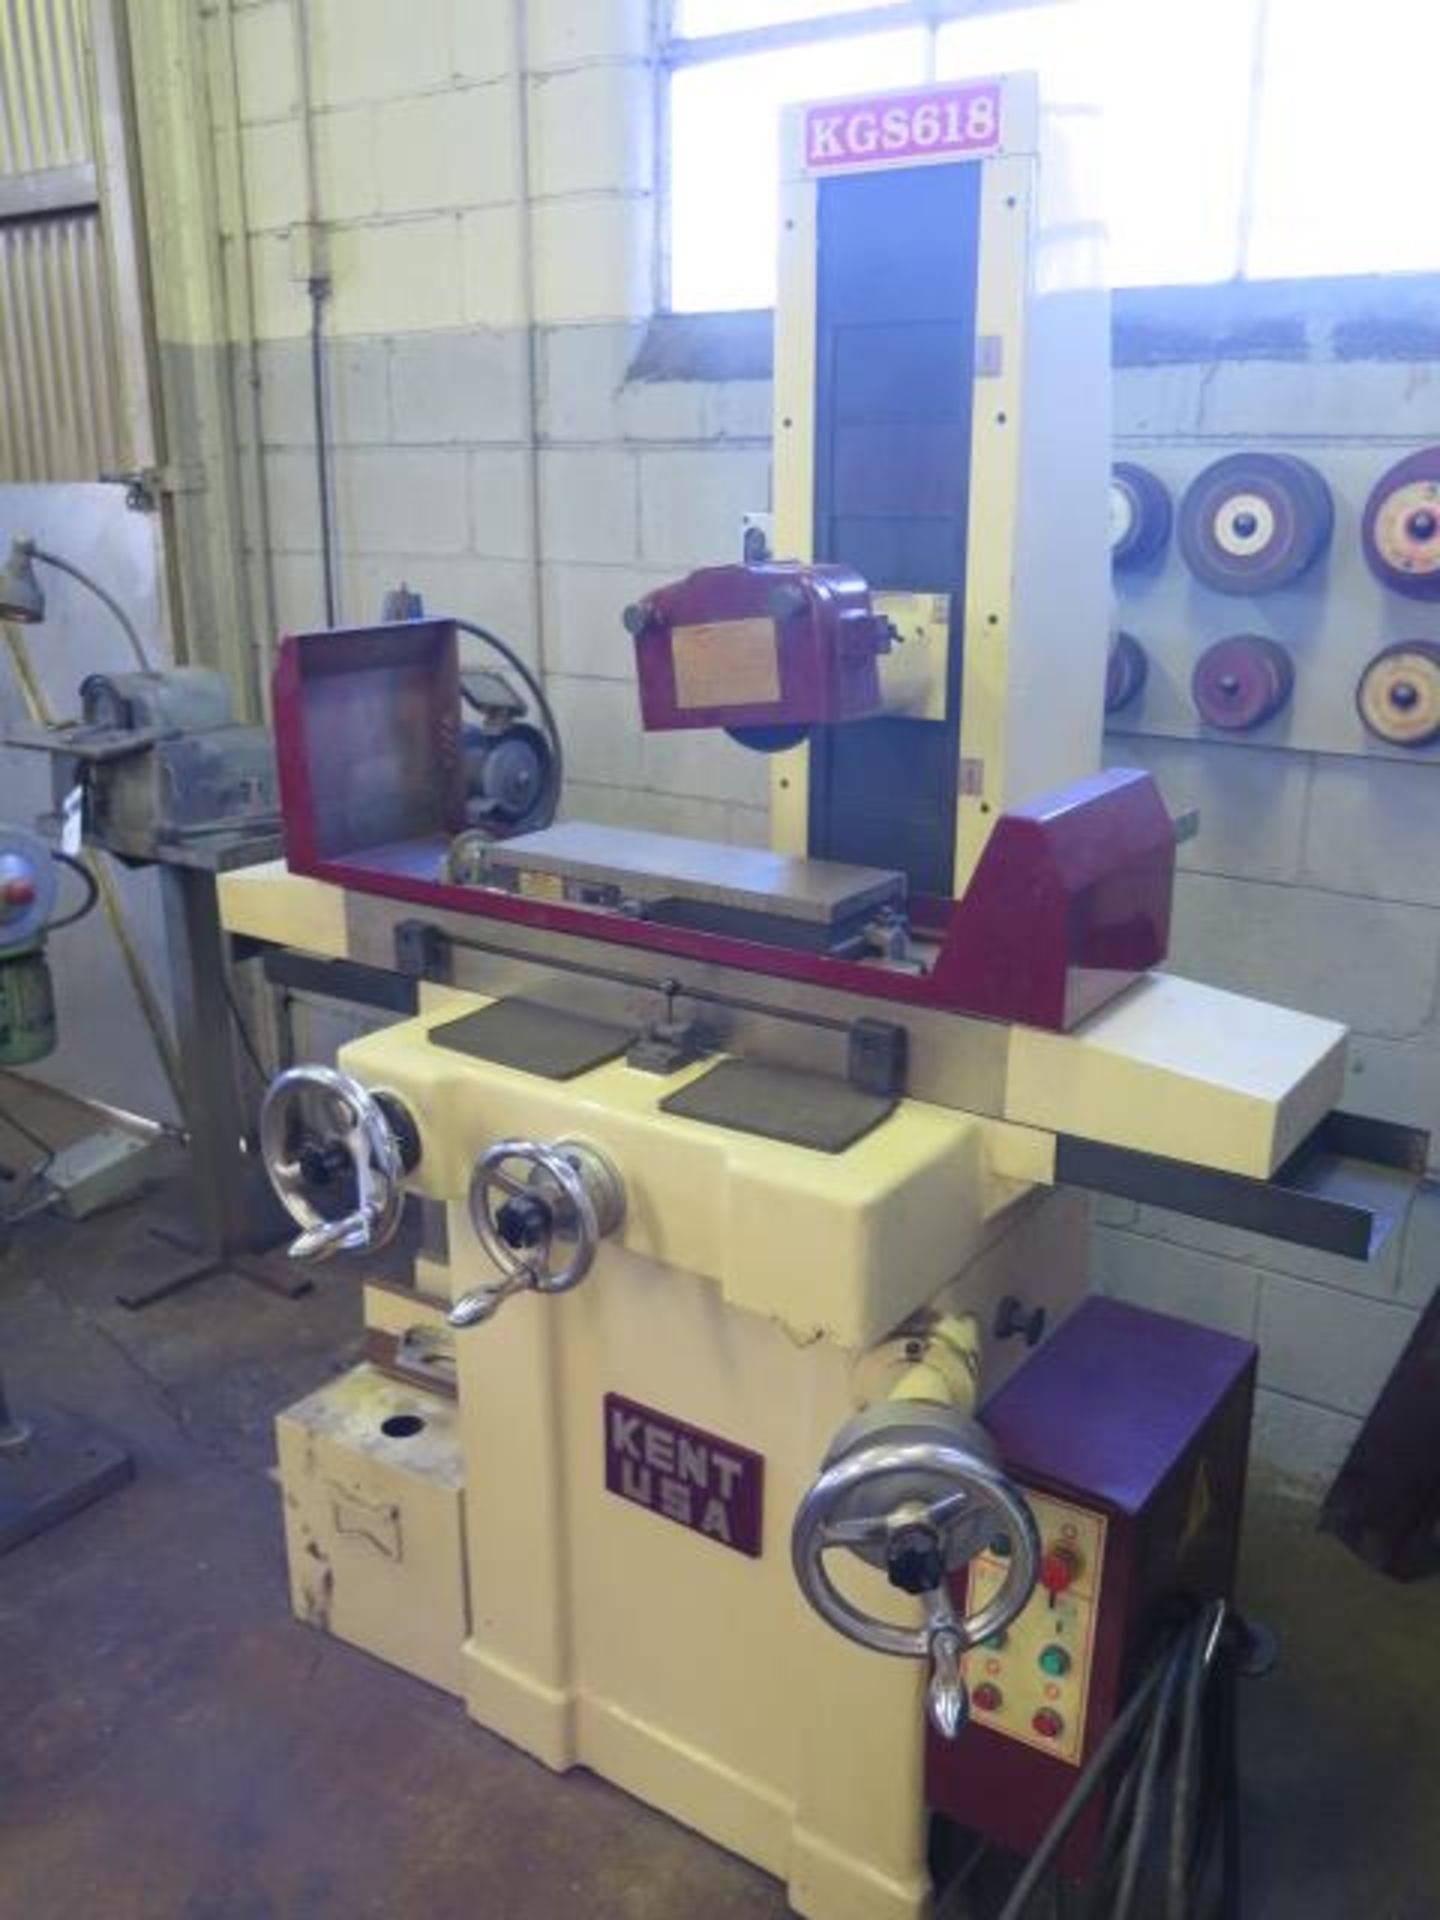 2001 Kent KGS-618 6” x 18” Surface Grinder s/n 40087 w/ Magnetic Chuck, Coolant - Image 2 of 10